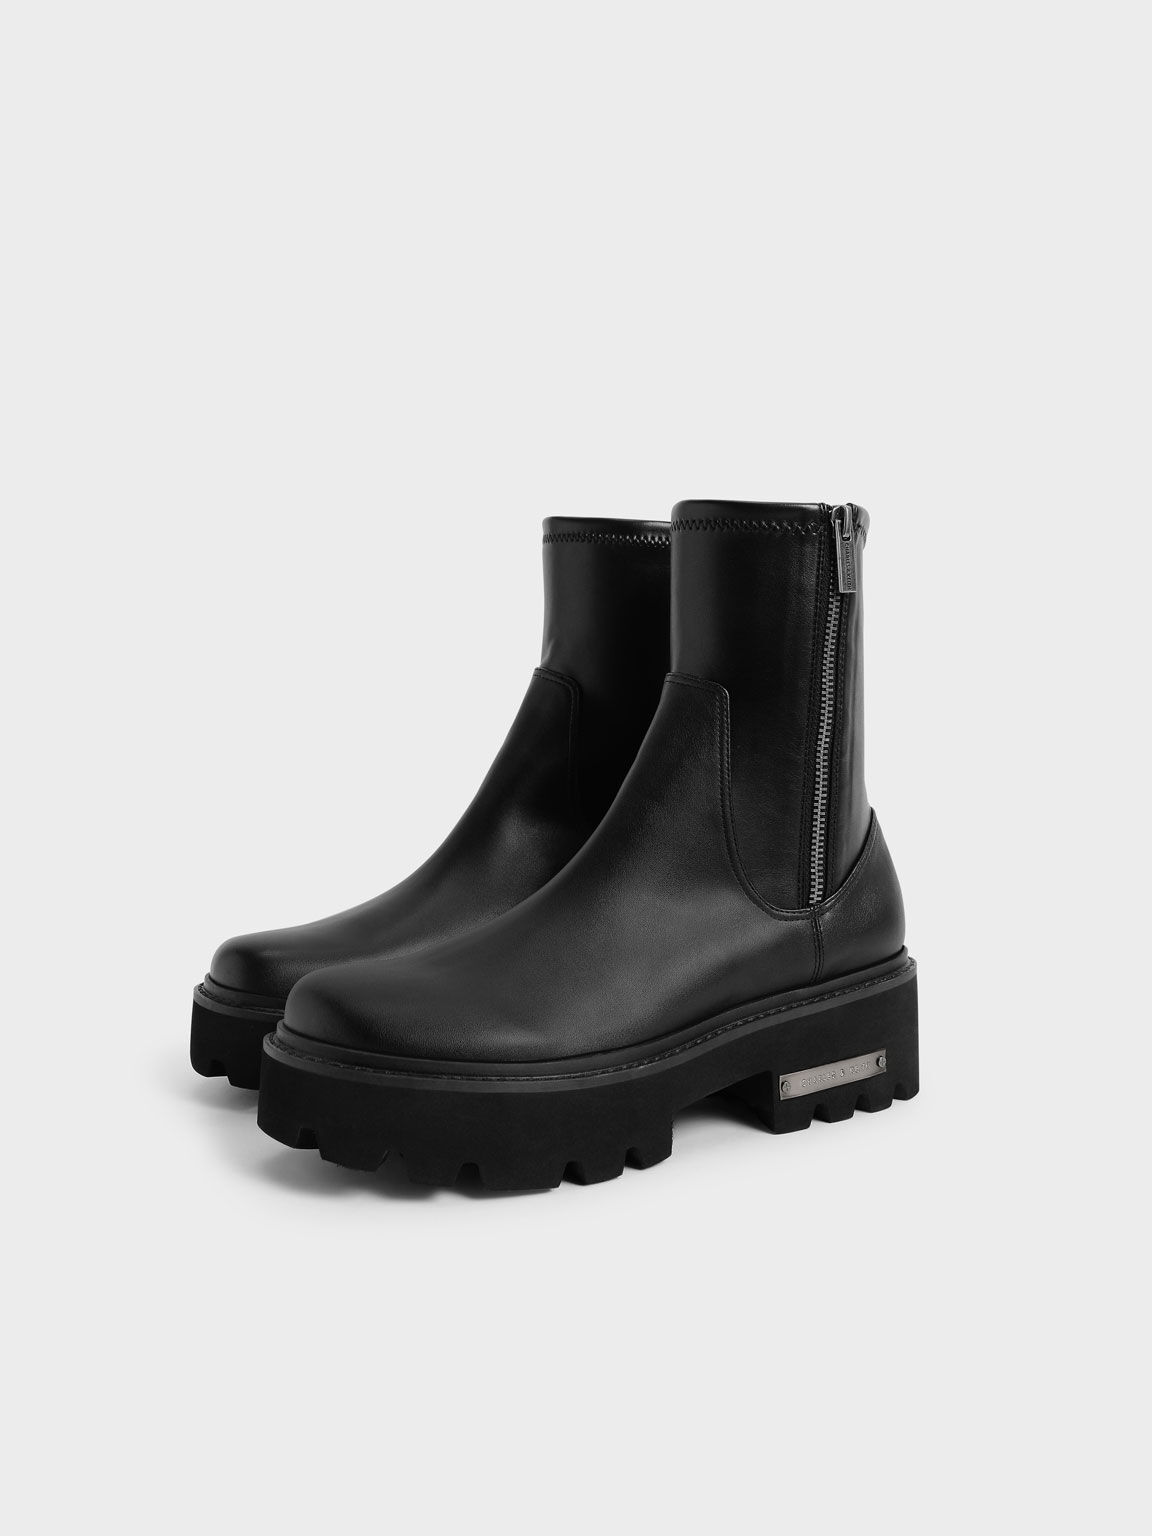 Black Side-Zip Ankle Boots - CHARLES & KEITH US